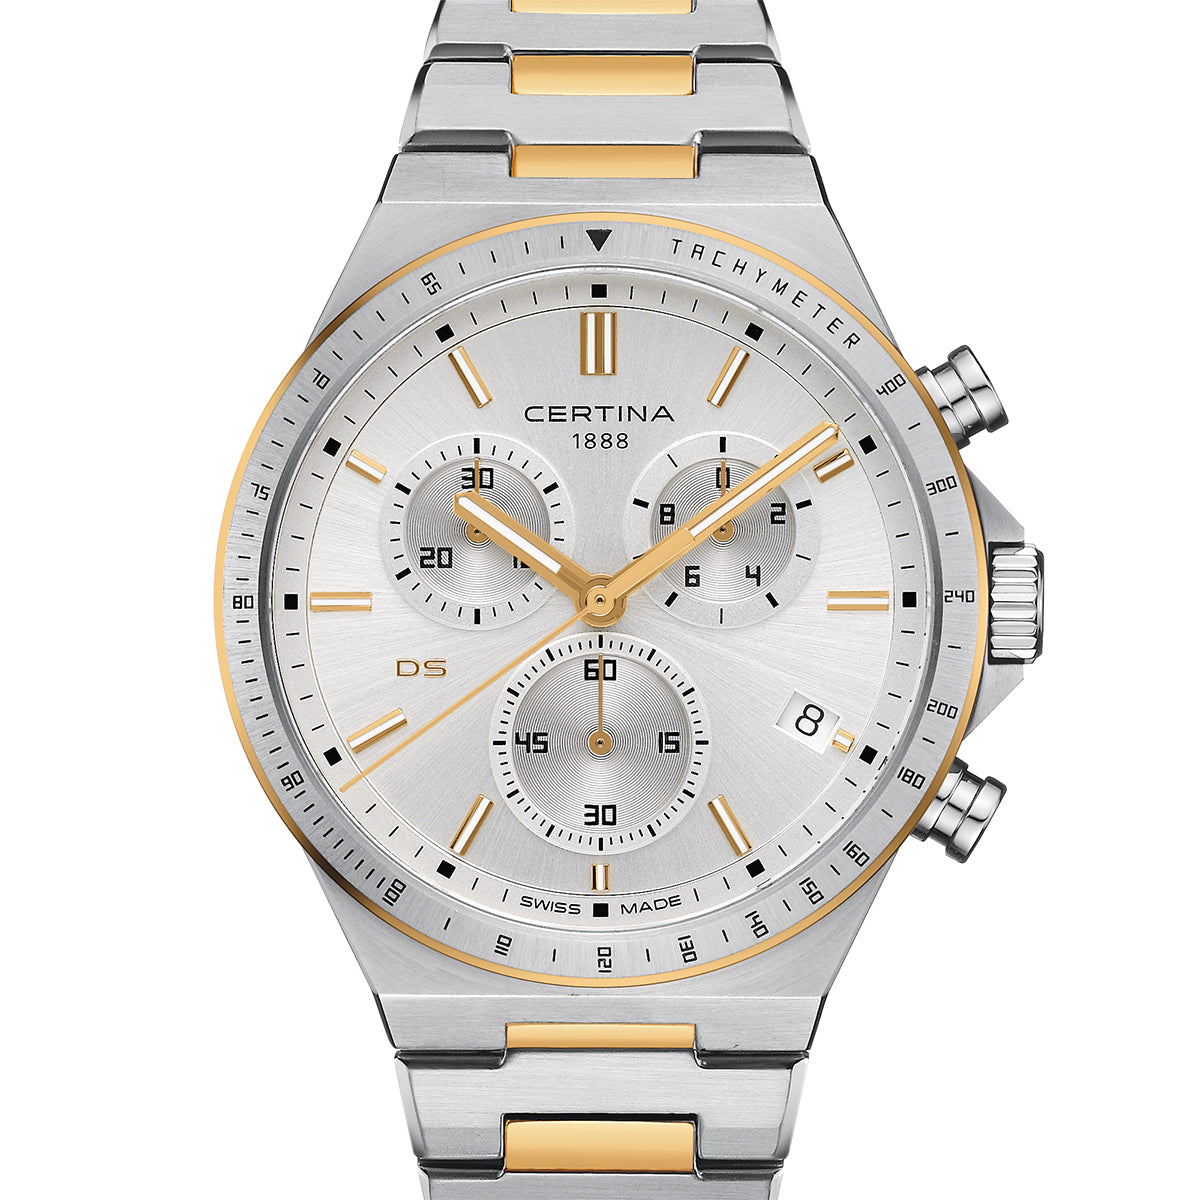 Certina DS-7 Powermatic 80 Watch Collection